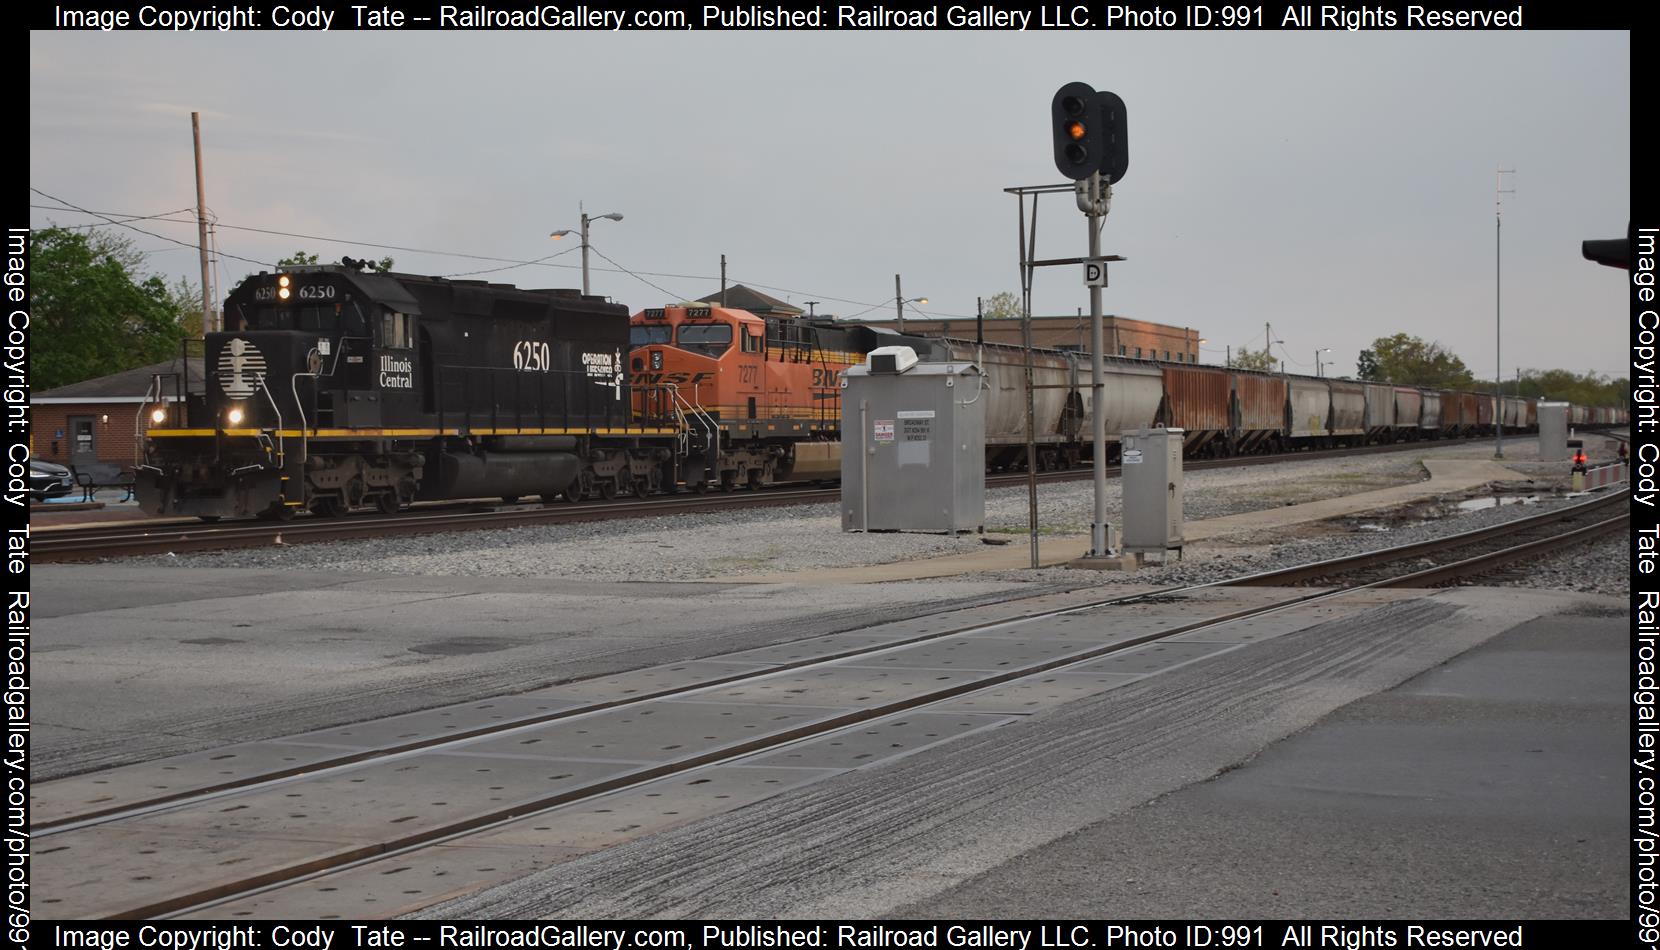 IC 6250 is a class SD40-3 and  is pictured in Centralia, Illinois, USA.  This was taken along the Centralia subdivision  on the Canadian National Railway. Photo Copyright: Cody  Tate uploaded to Railroad Gallery on 04/23/2023. This photograph of IC 6250 was taken on Friday, April 21, 2023. All Rights Reserved. 